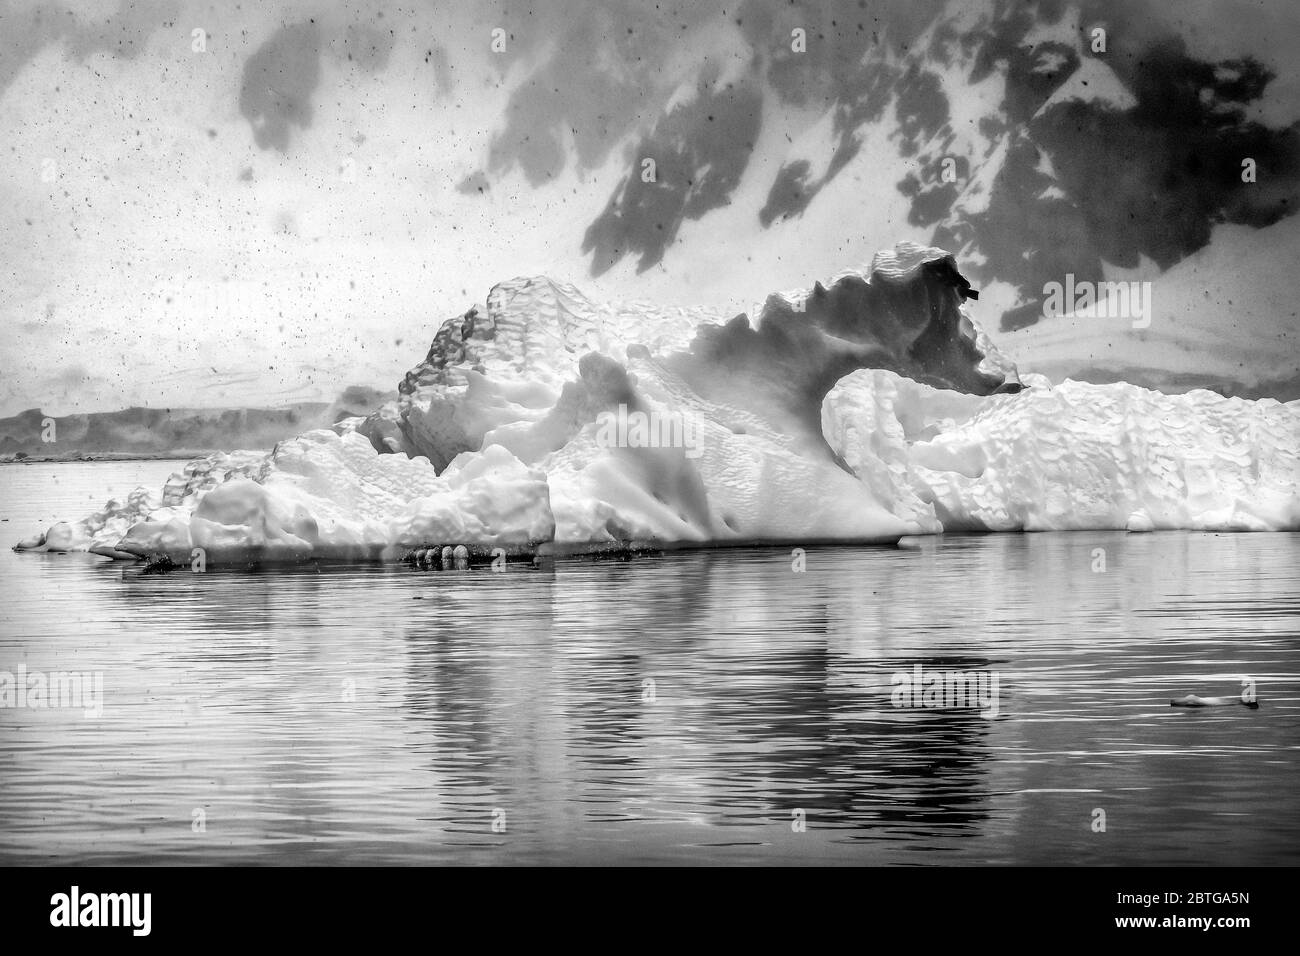 The culture iceberg Black and White Stock Photos & Images - Alamy